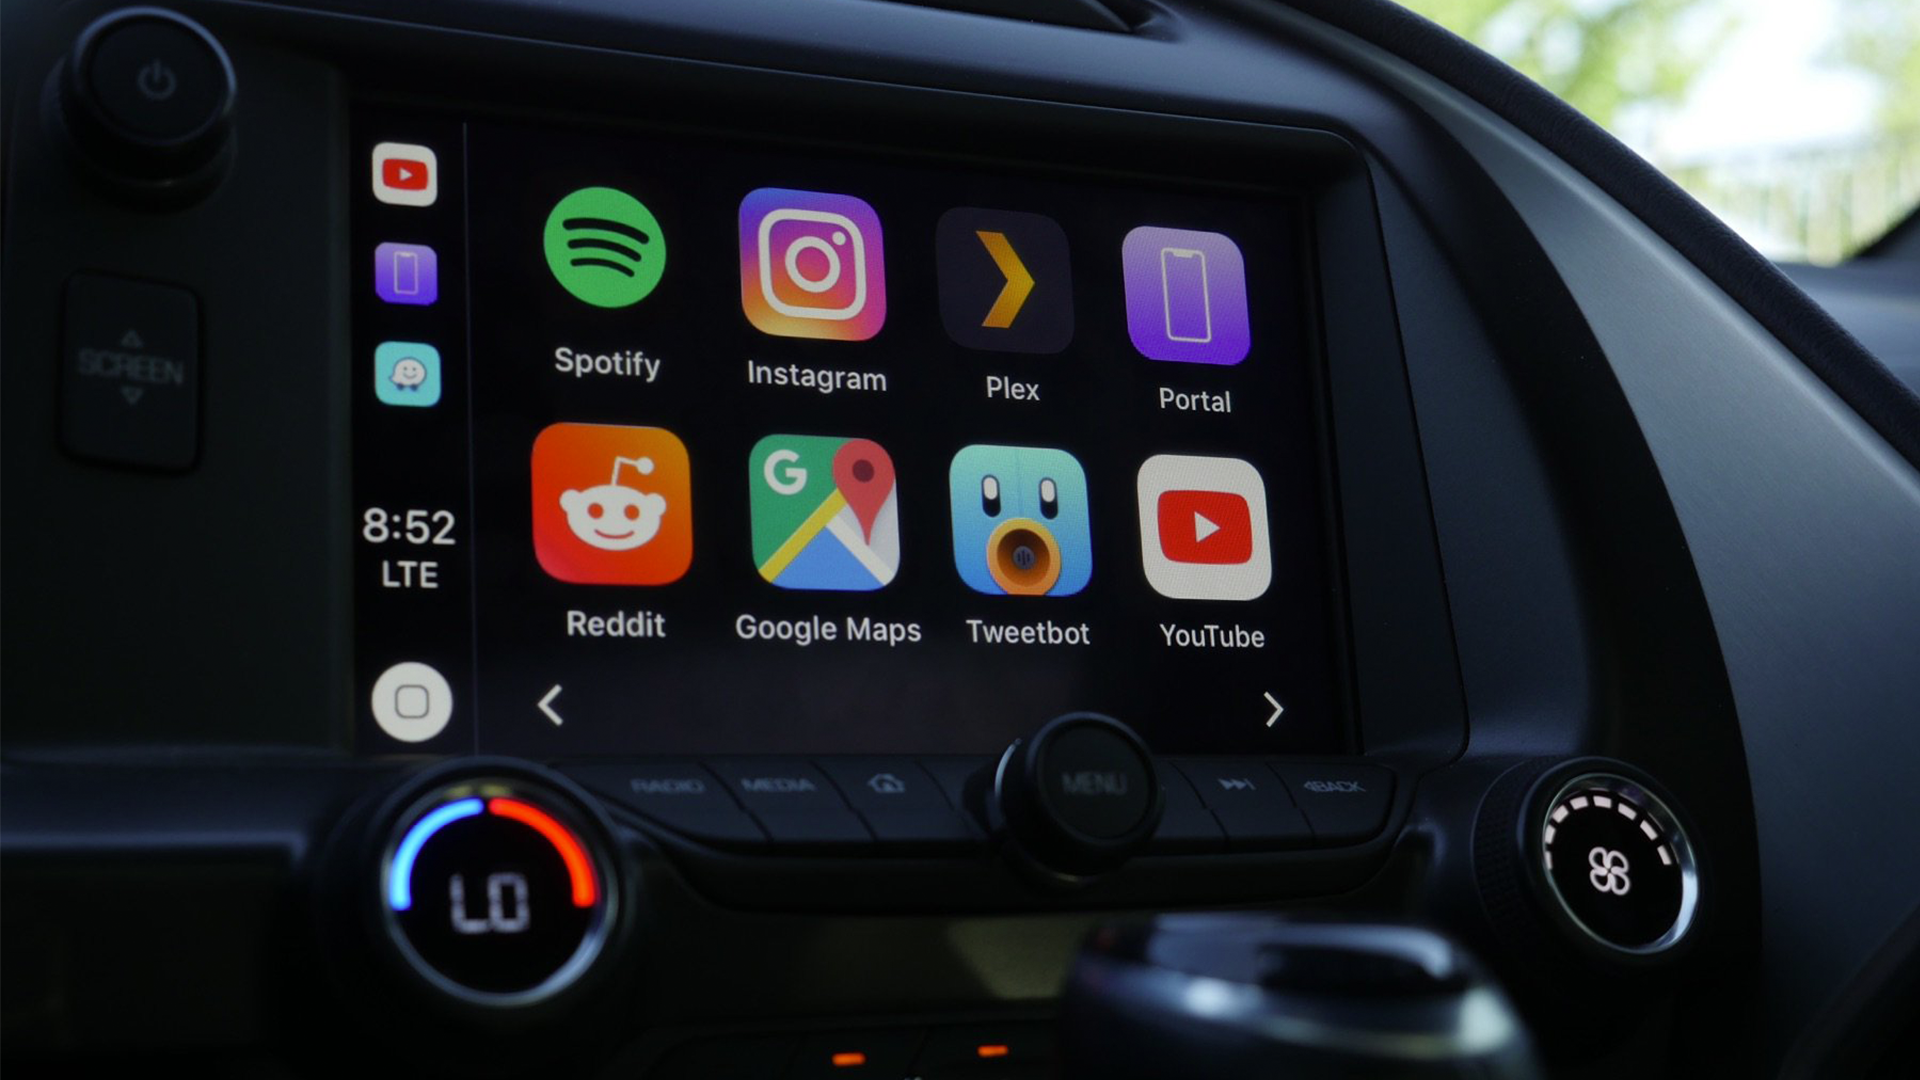 A CarPlay home screen with many apps including Instagram, Plex, Reddit, Tweetbot, and YouTube.